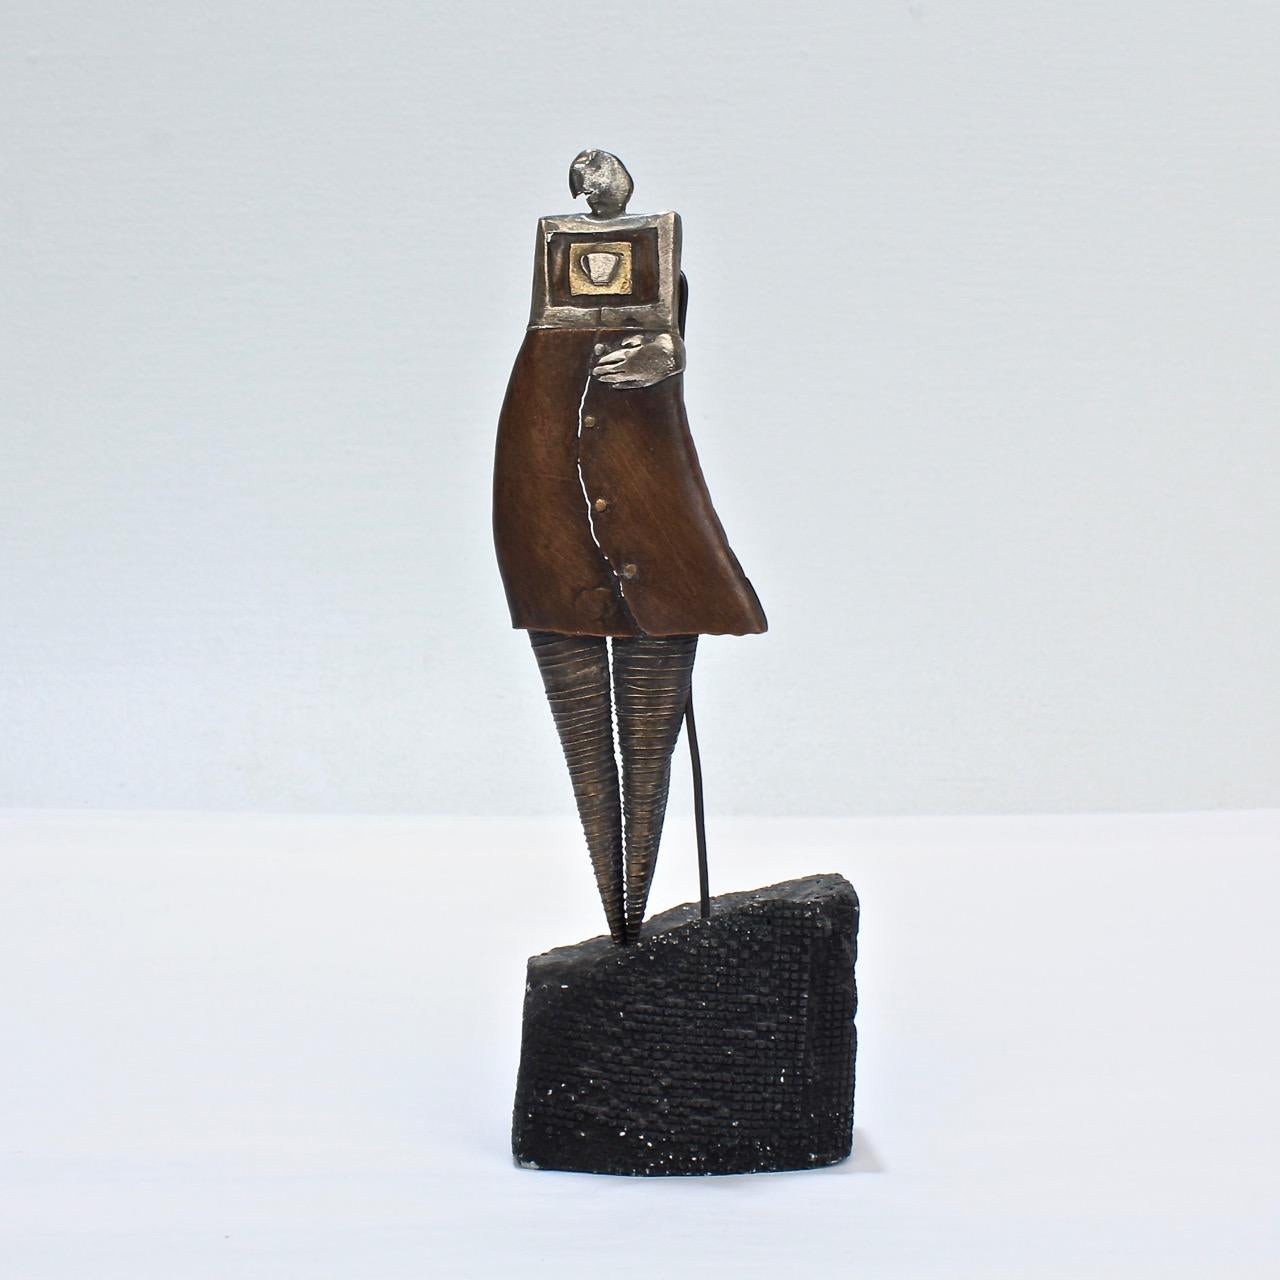 A wonderful mixed metals Steampunk brooch from the jewelry maker and sculptor, Monika Tinker.

The body constructed in copper with silver and gold inlay and the legs in silver. 

Complete with its original artist made stand.

Faintly signed on the